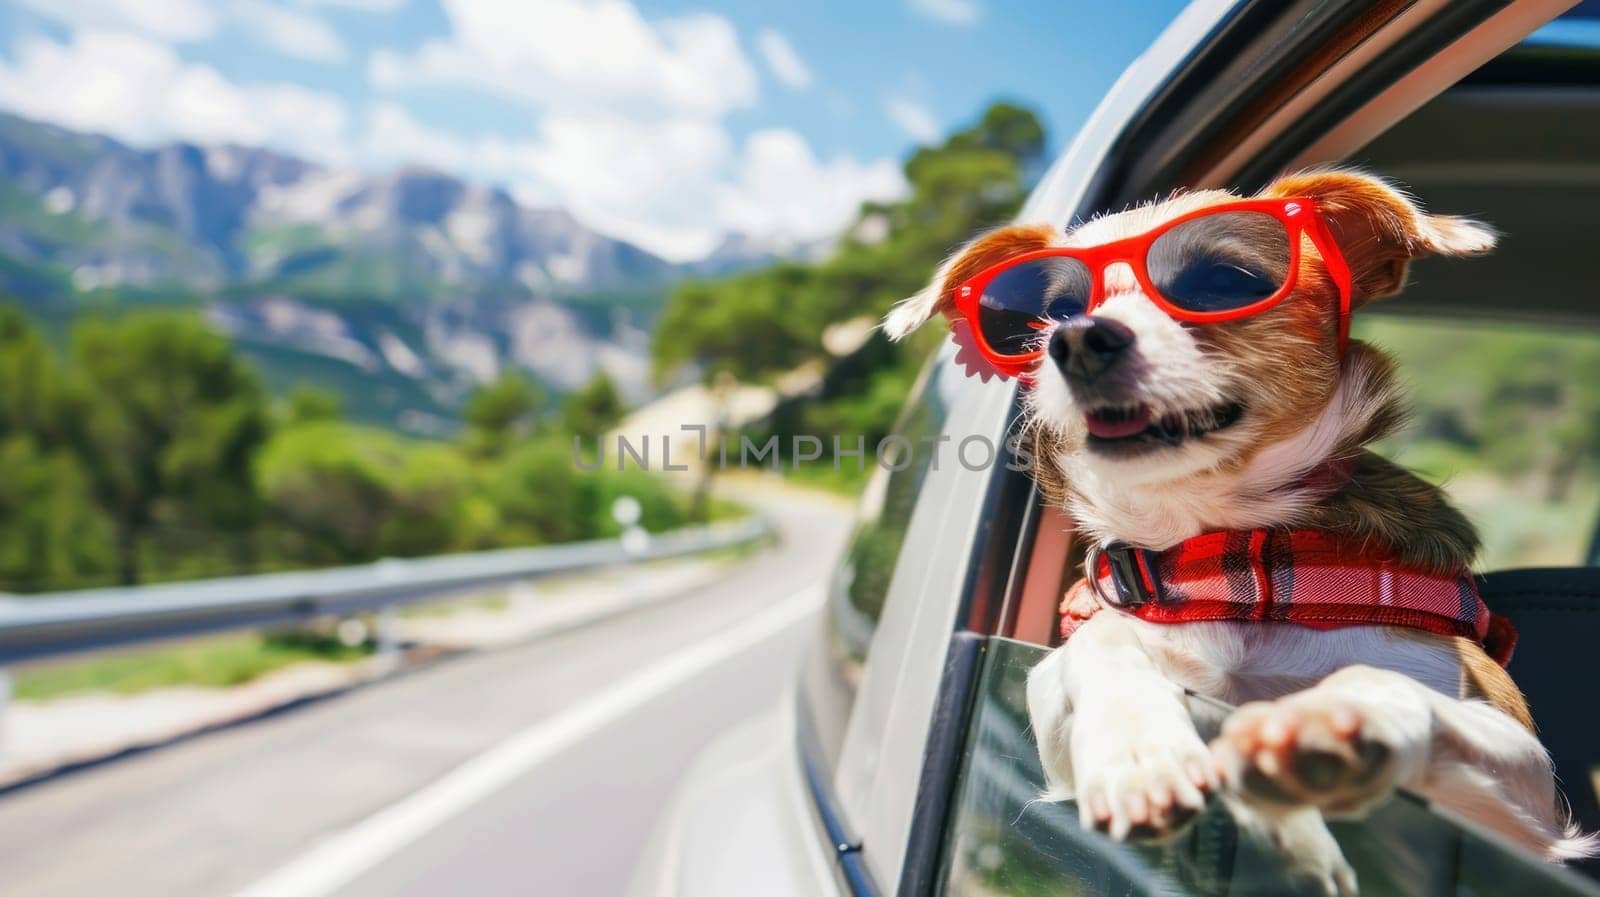 A dog is sitting in a car window with sunglasses on by golfmerrymaker